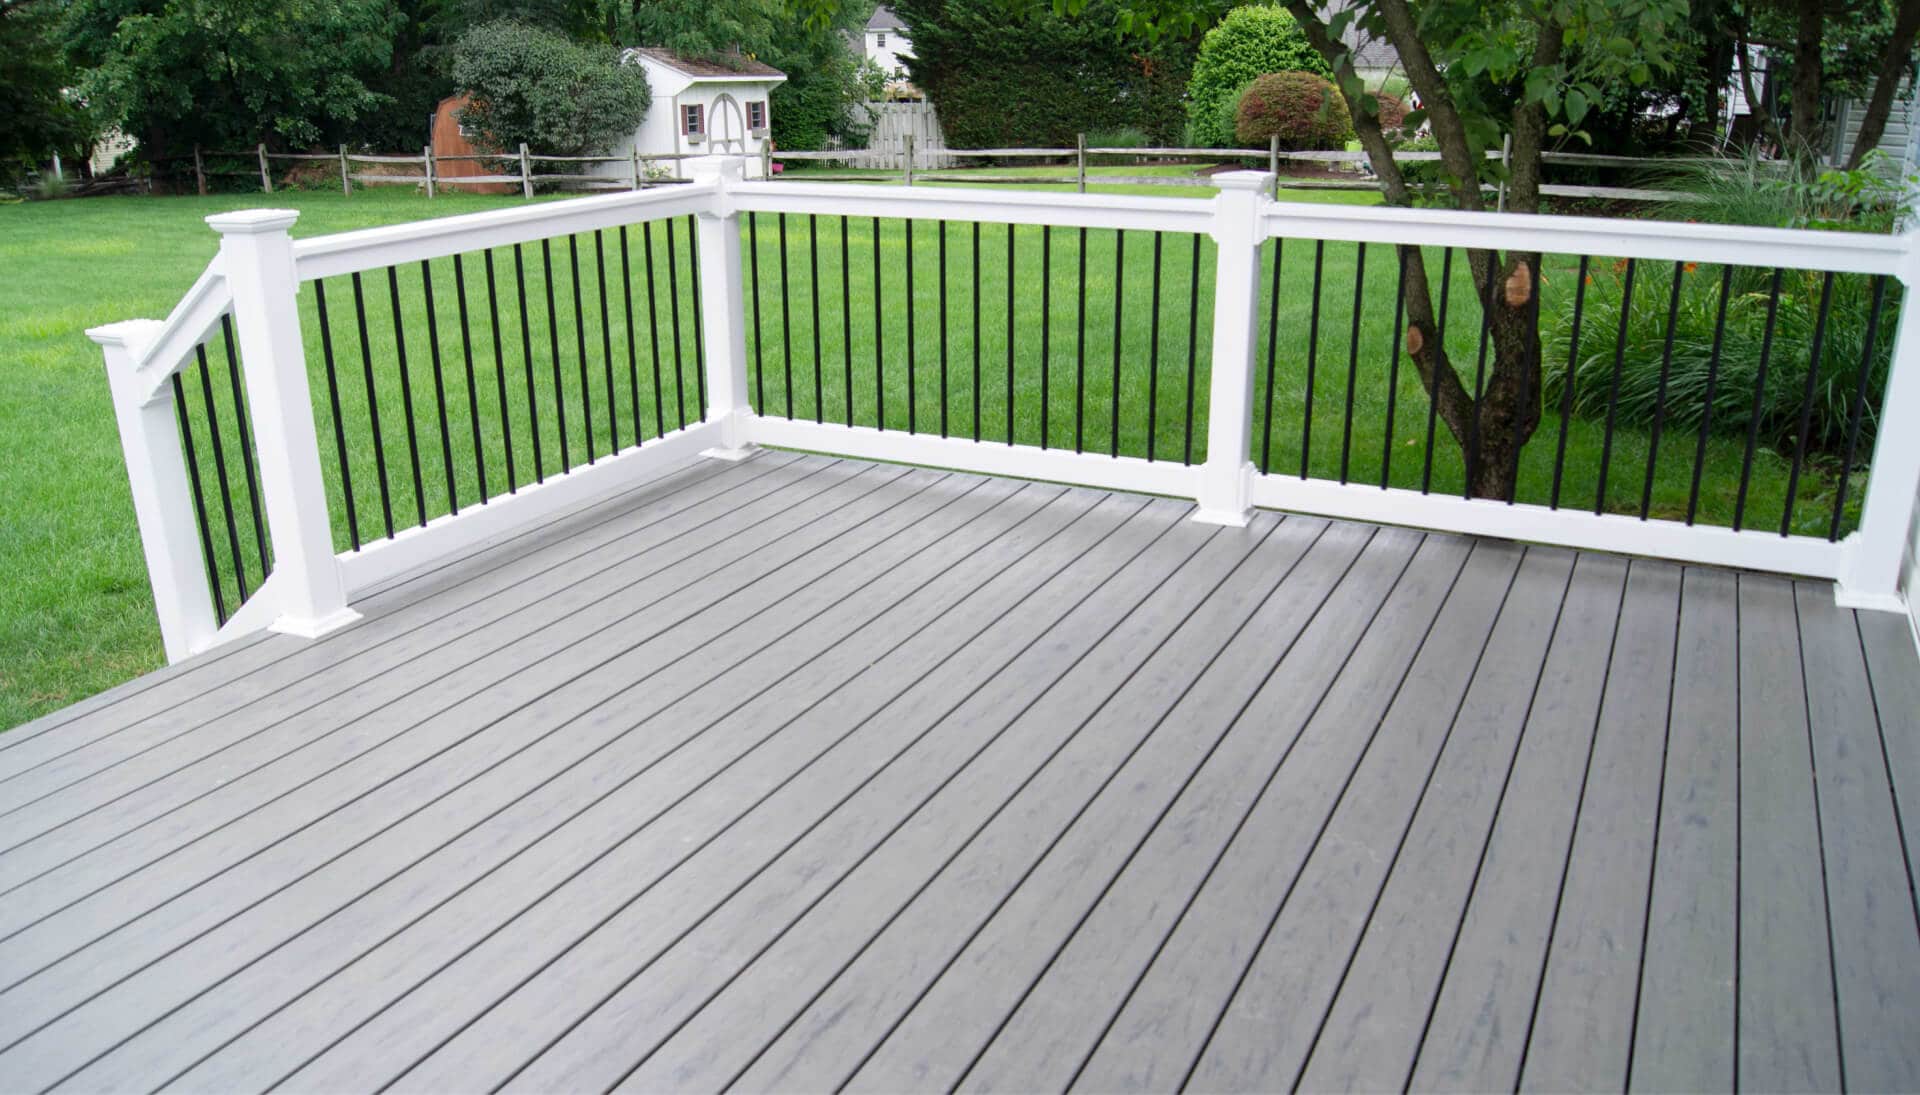 Specialists in deck railing and covers Eugene, Oregon